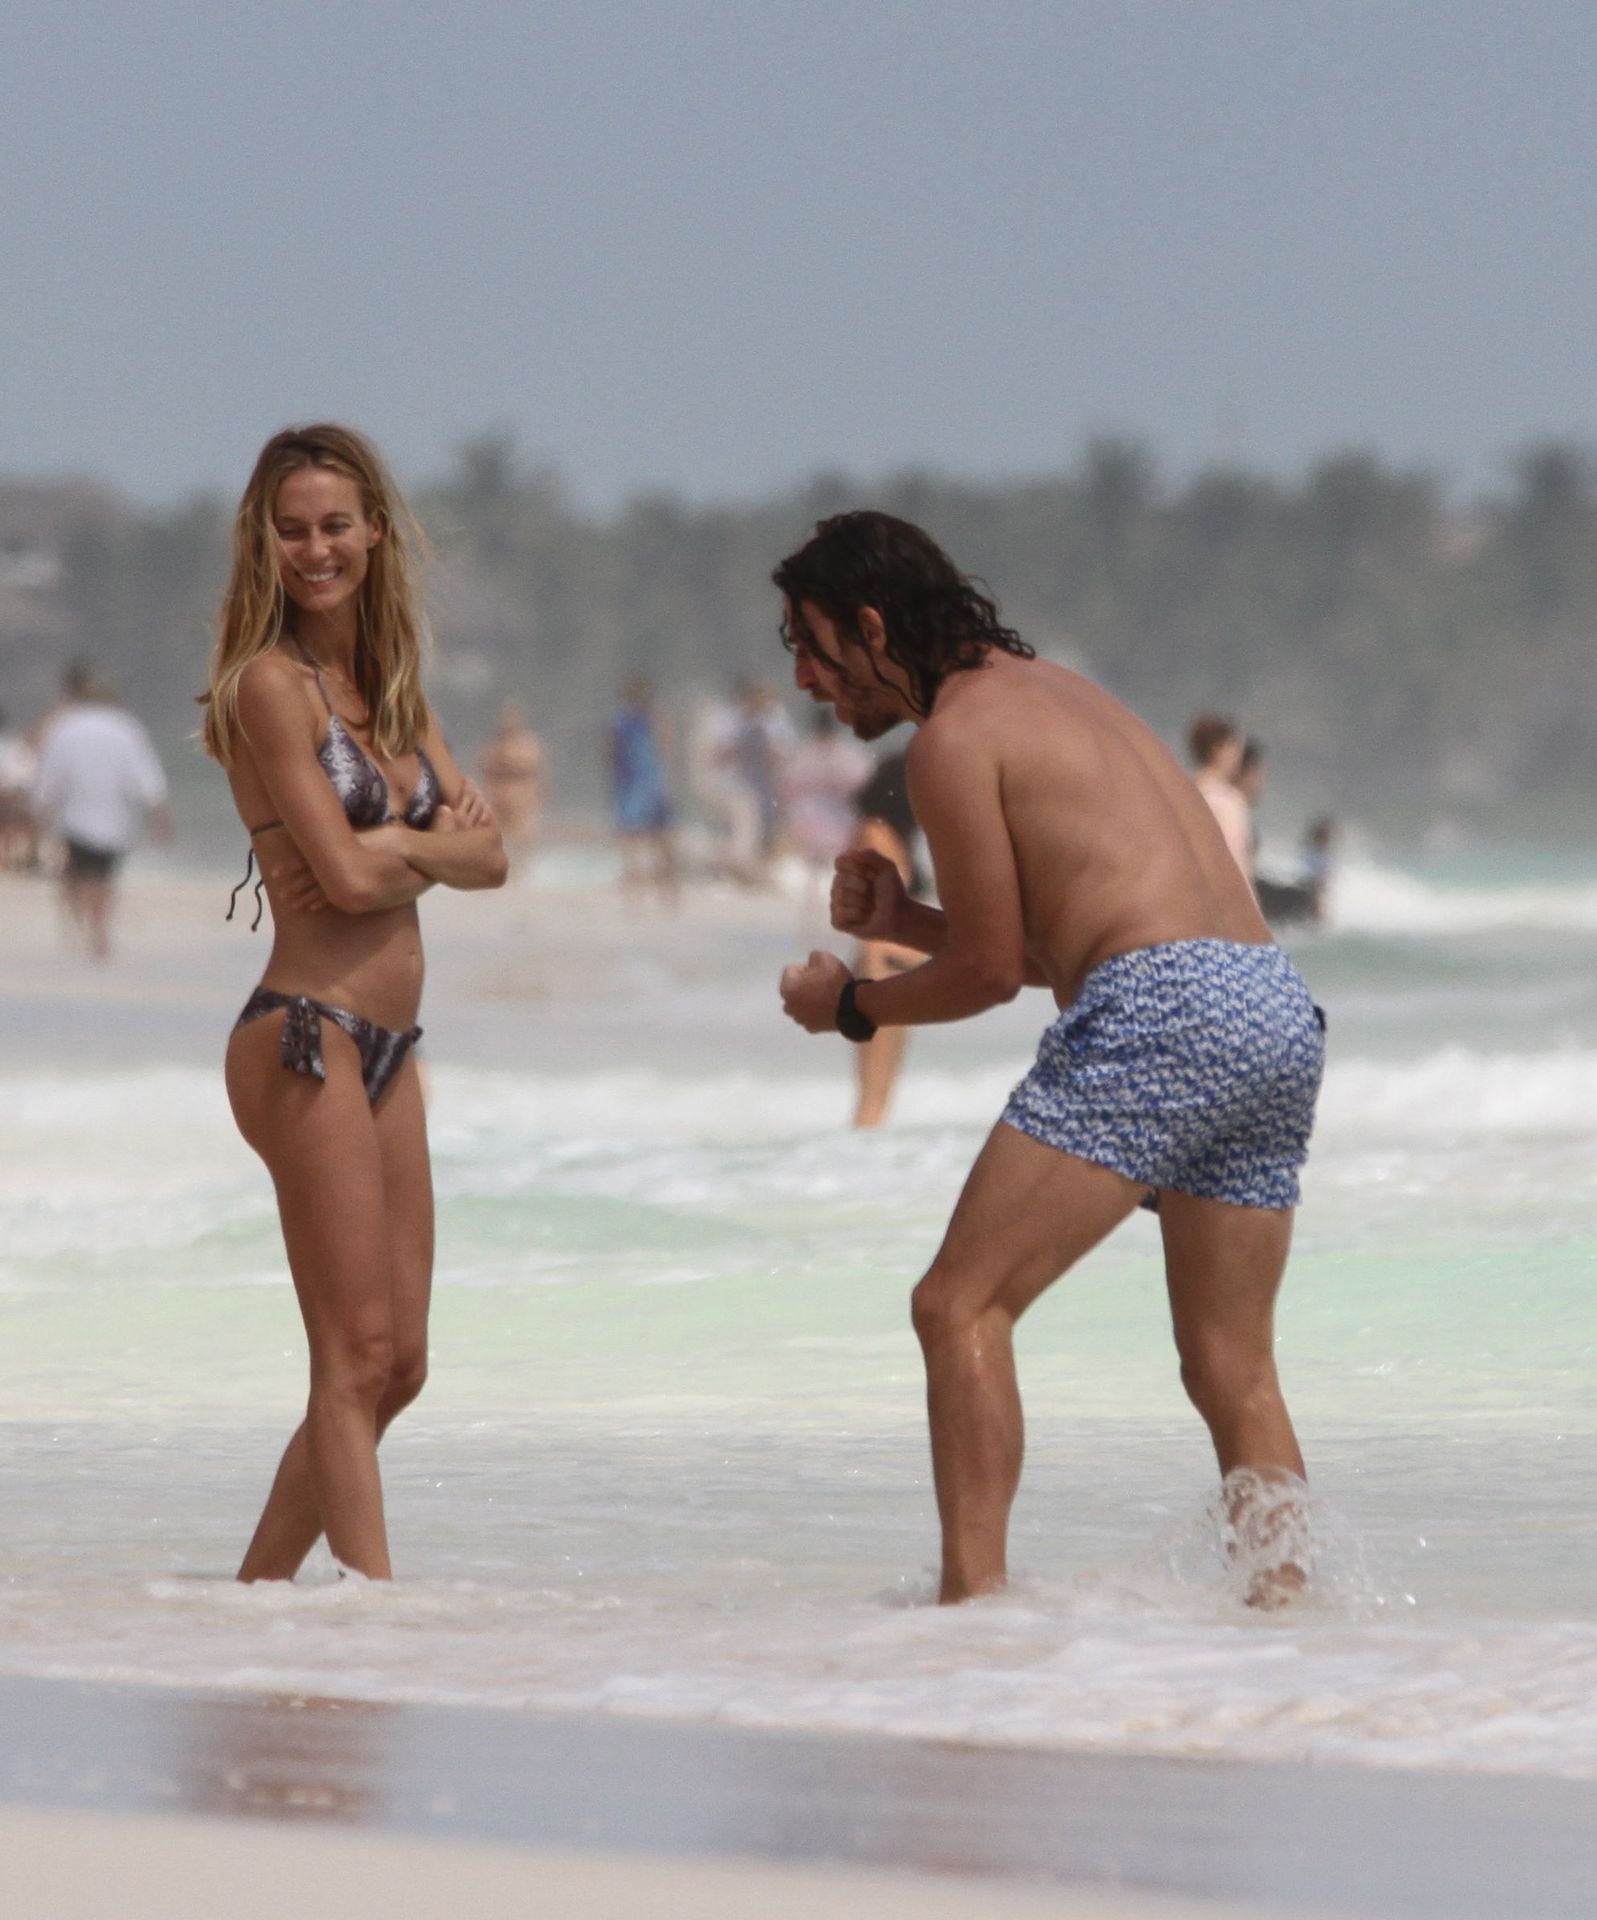 Carles Puyol Enjoy A Family Vacation With Vanesa Lorenzo In Mexico 0014